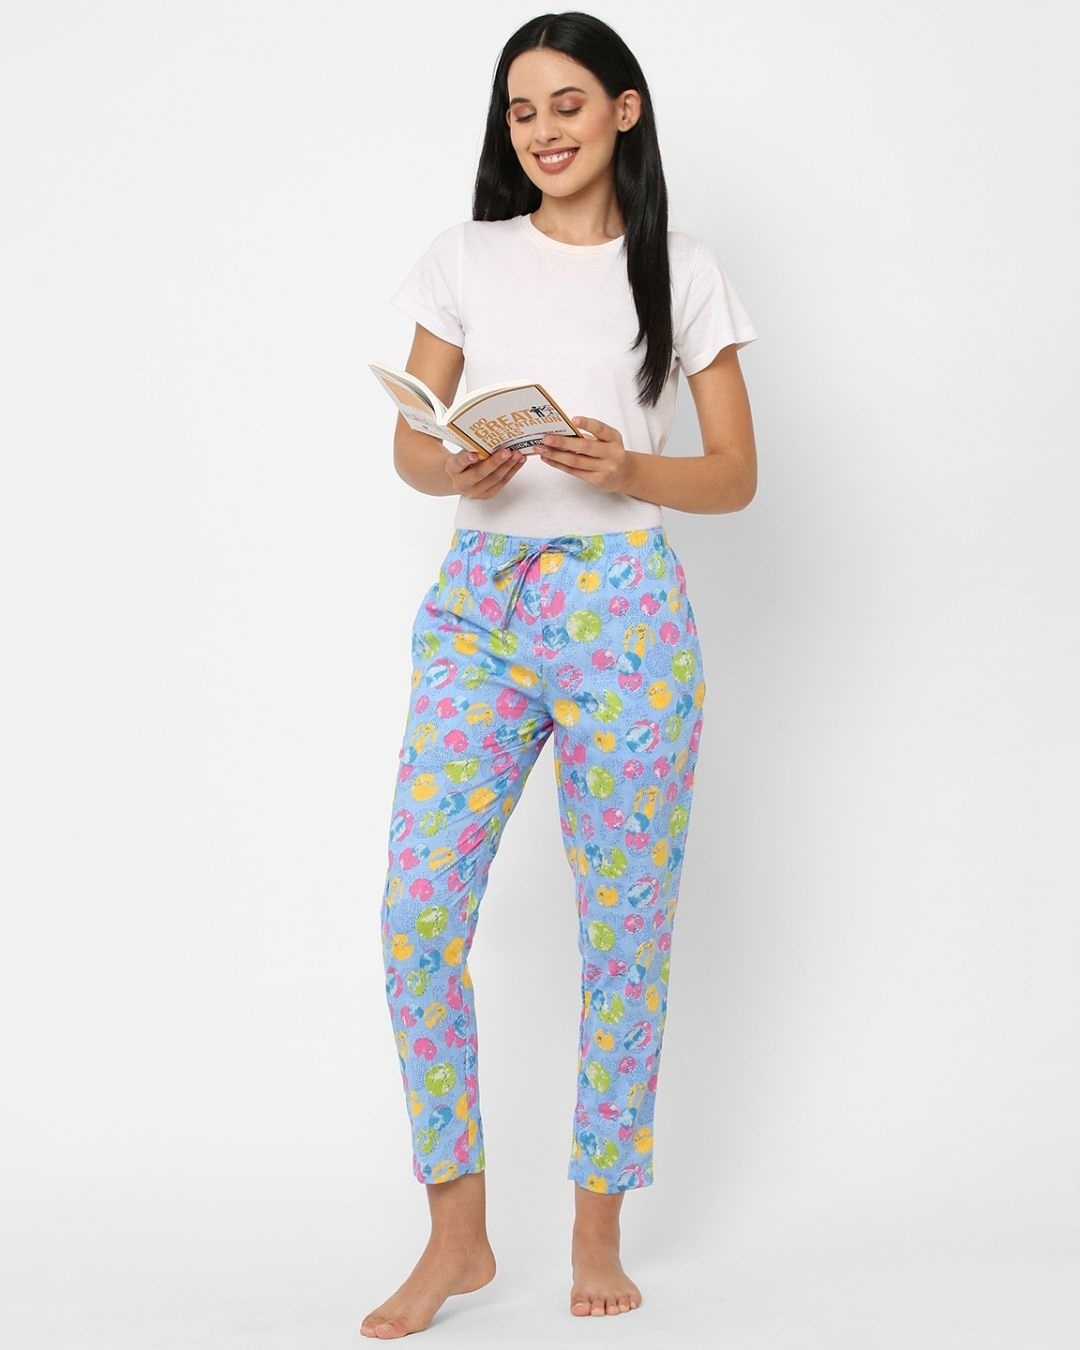 Shop Women's Blue All Over Printed Cotton Lounge Pants